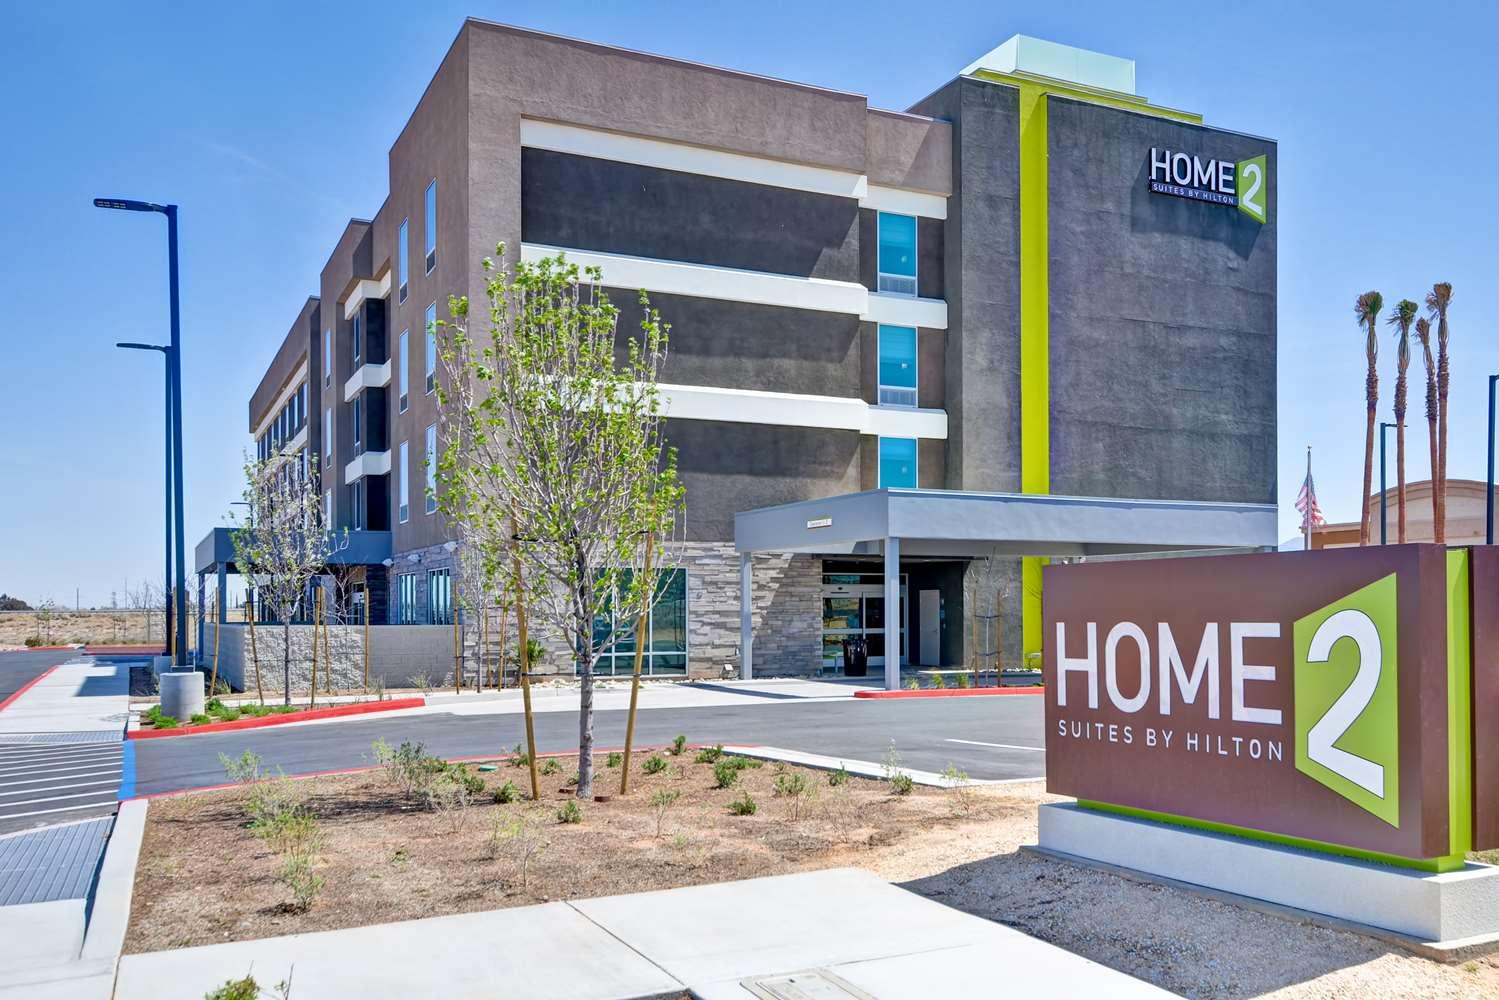 Home2 Suites by Hilton Palmdale in Palmdale, CA